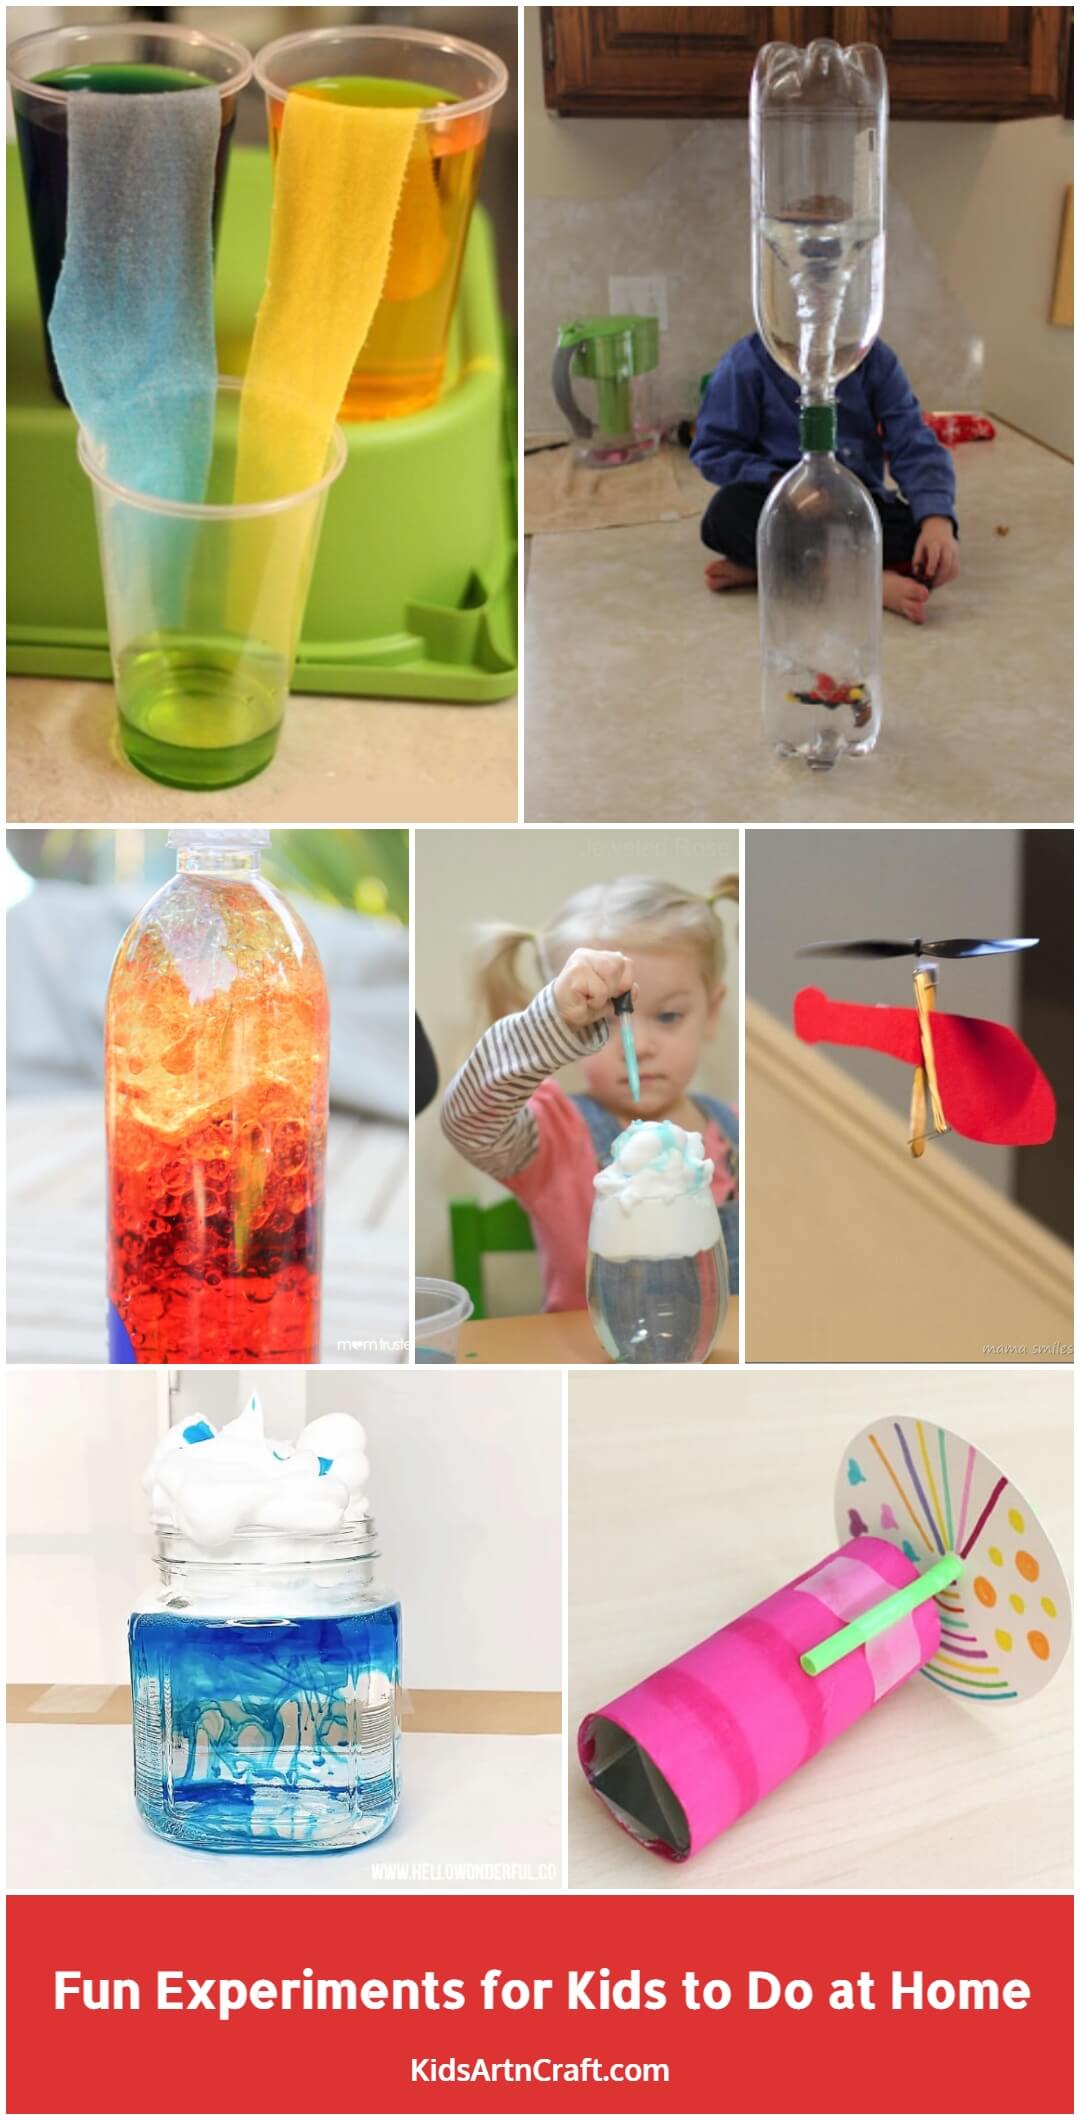 Fun experiments for kids to Do at Home